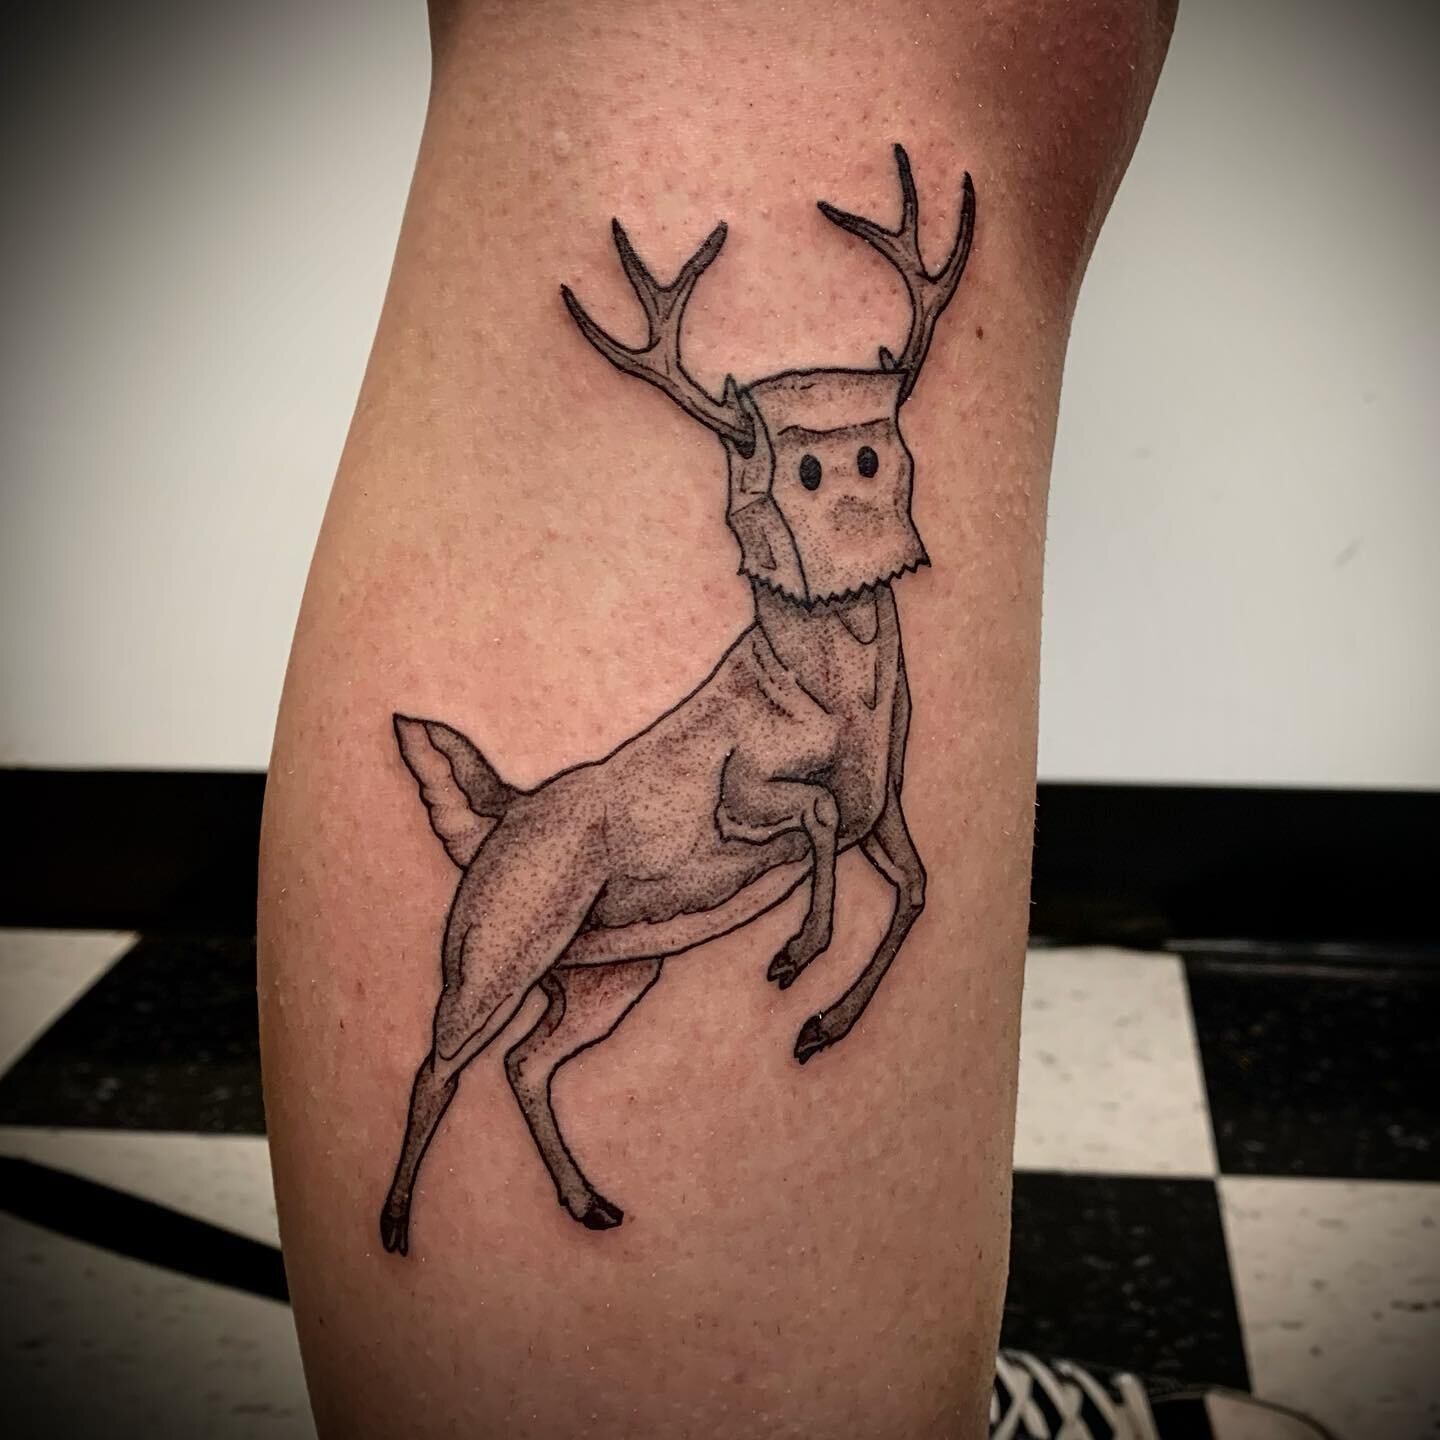 This was the most Portland tattoo I could think of; but too bad PDX cause now this deer lives on in the true North strong and free! 🤣🍁🏔